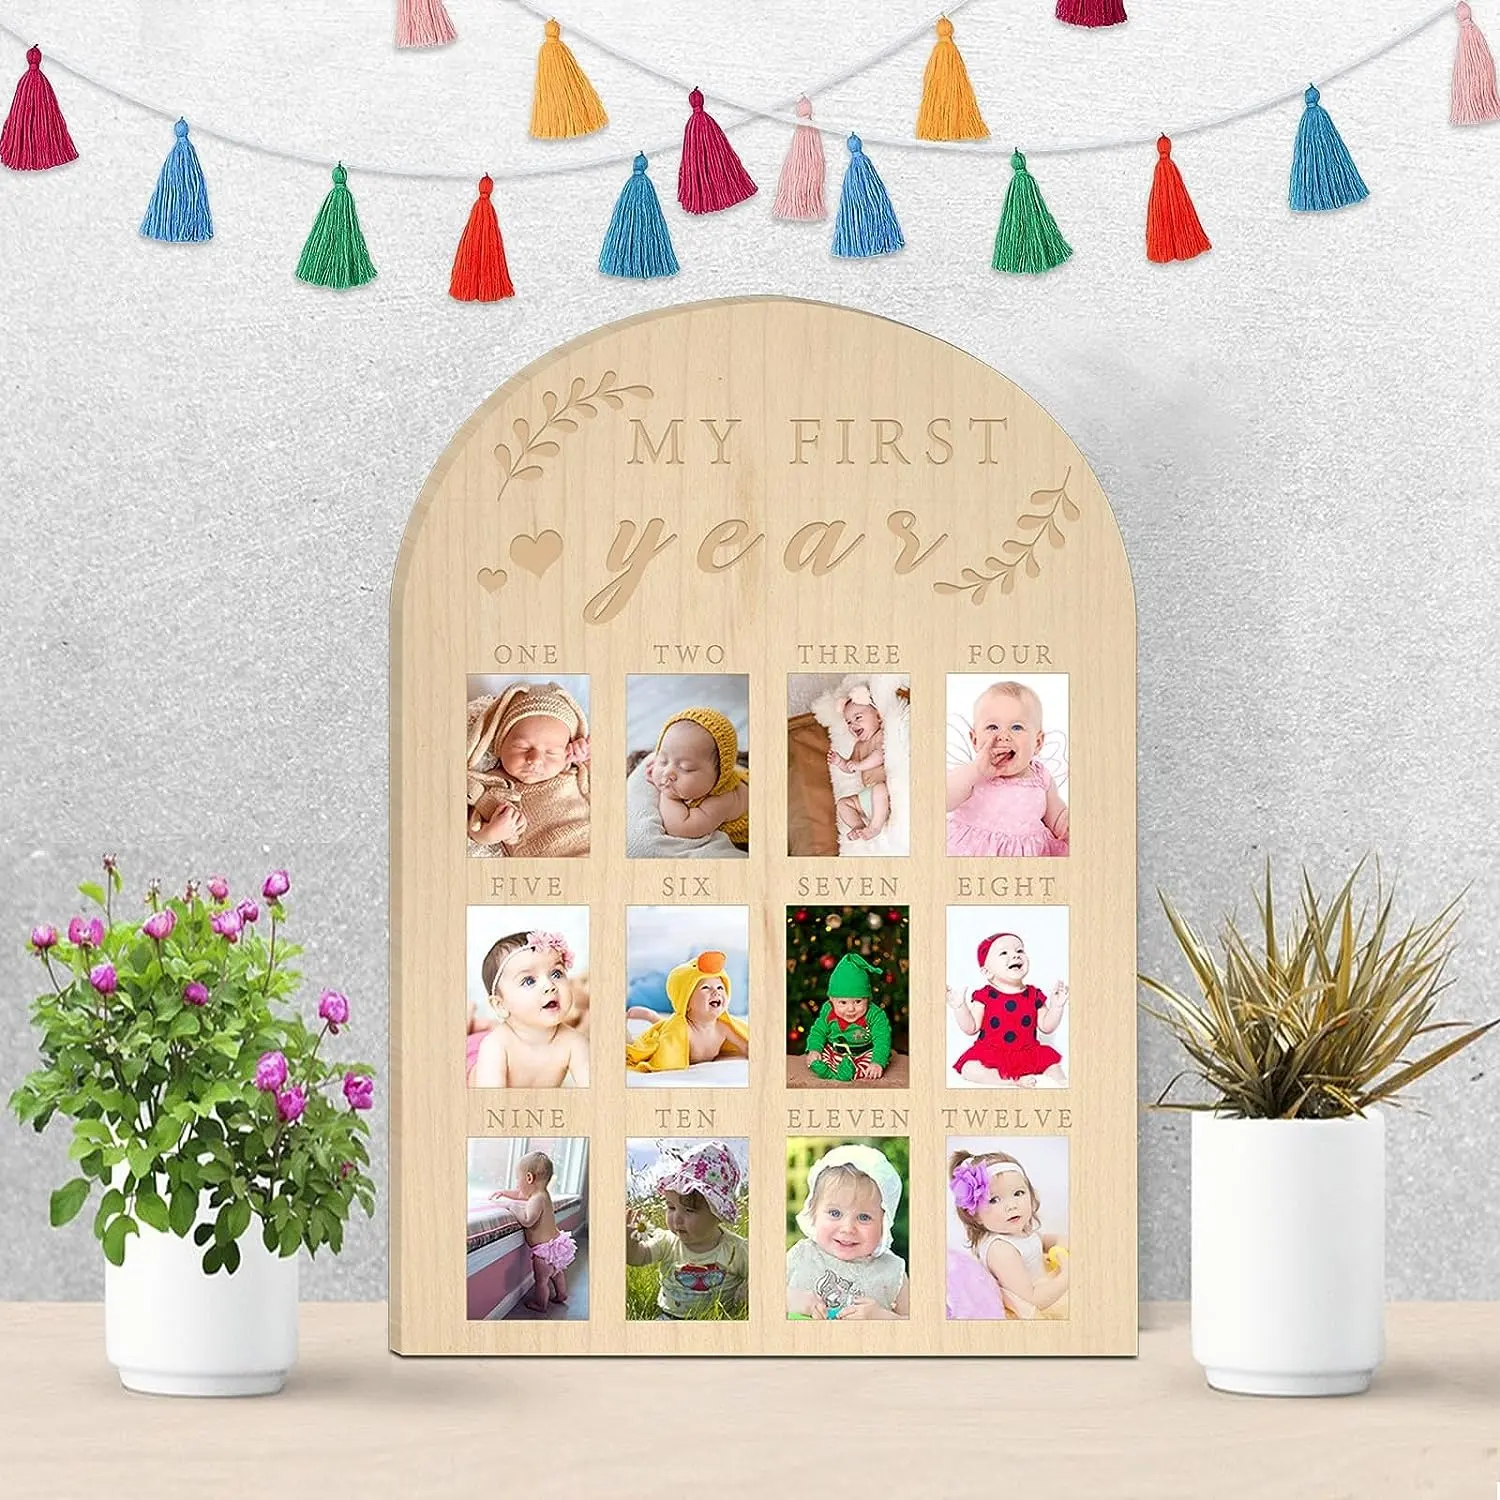 My First Year Photo Display Wooden Plaque Babies First Year Photo Frame Milestone Board 12 Months Baby Picture Frame